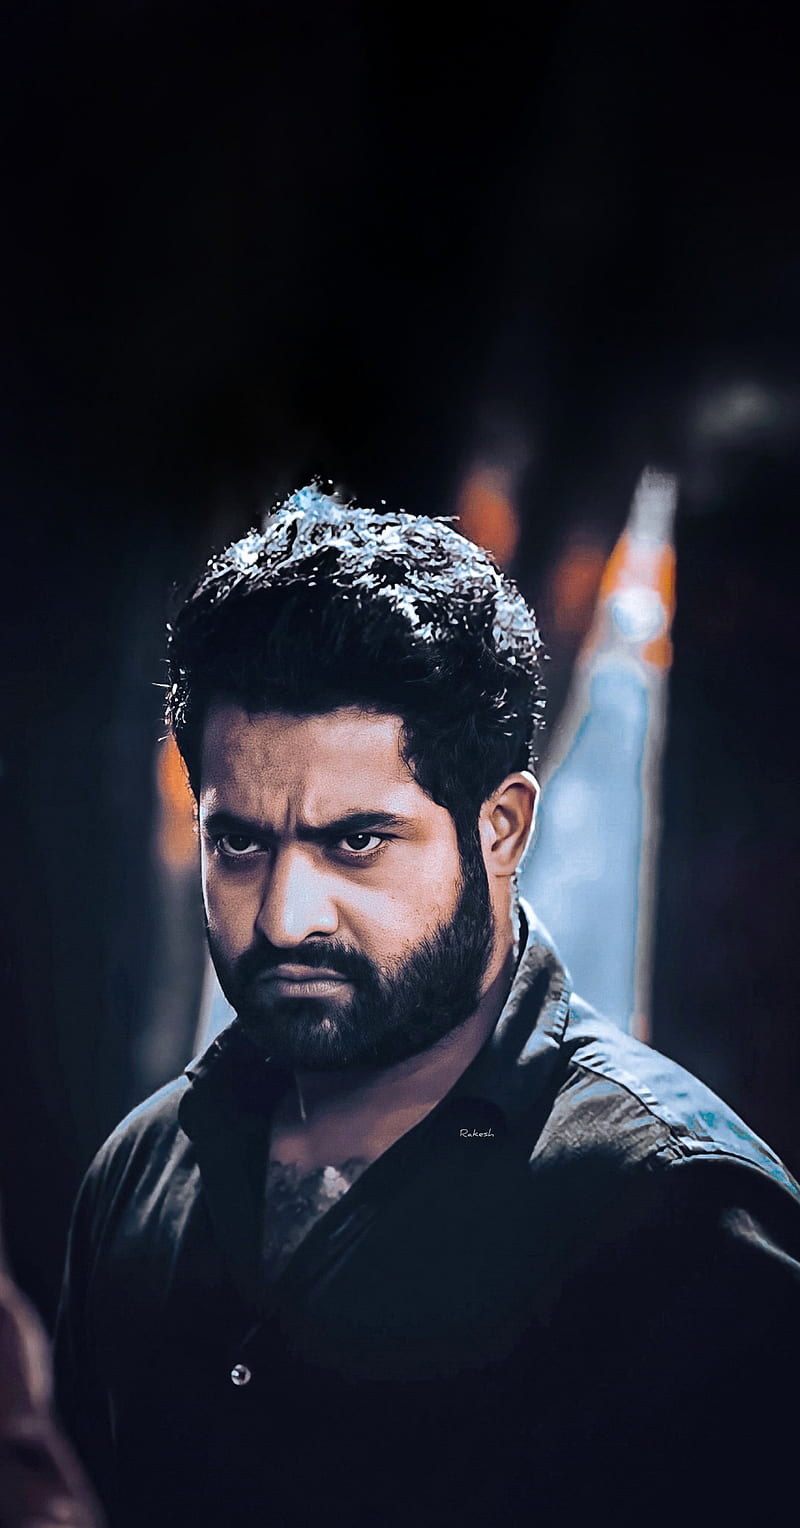 The Ultimate Collection of Over 999 High-Definition ntr Images – Spectacular ntr Images in Full 4K